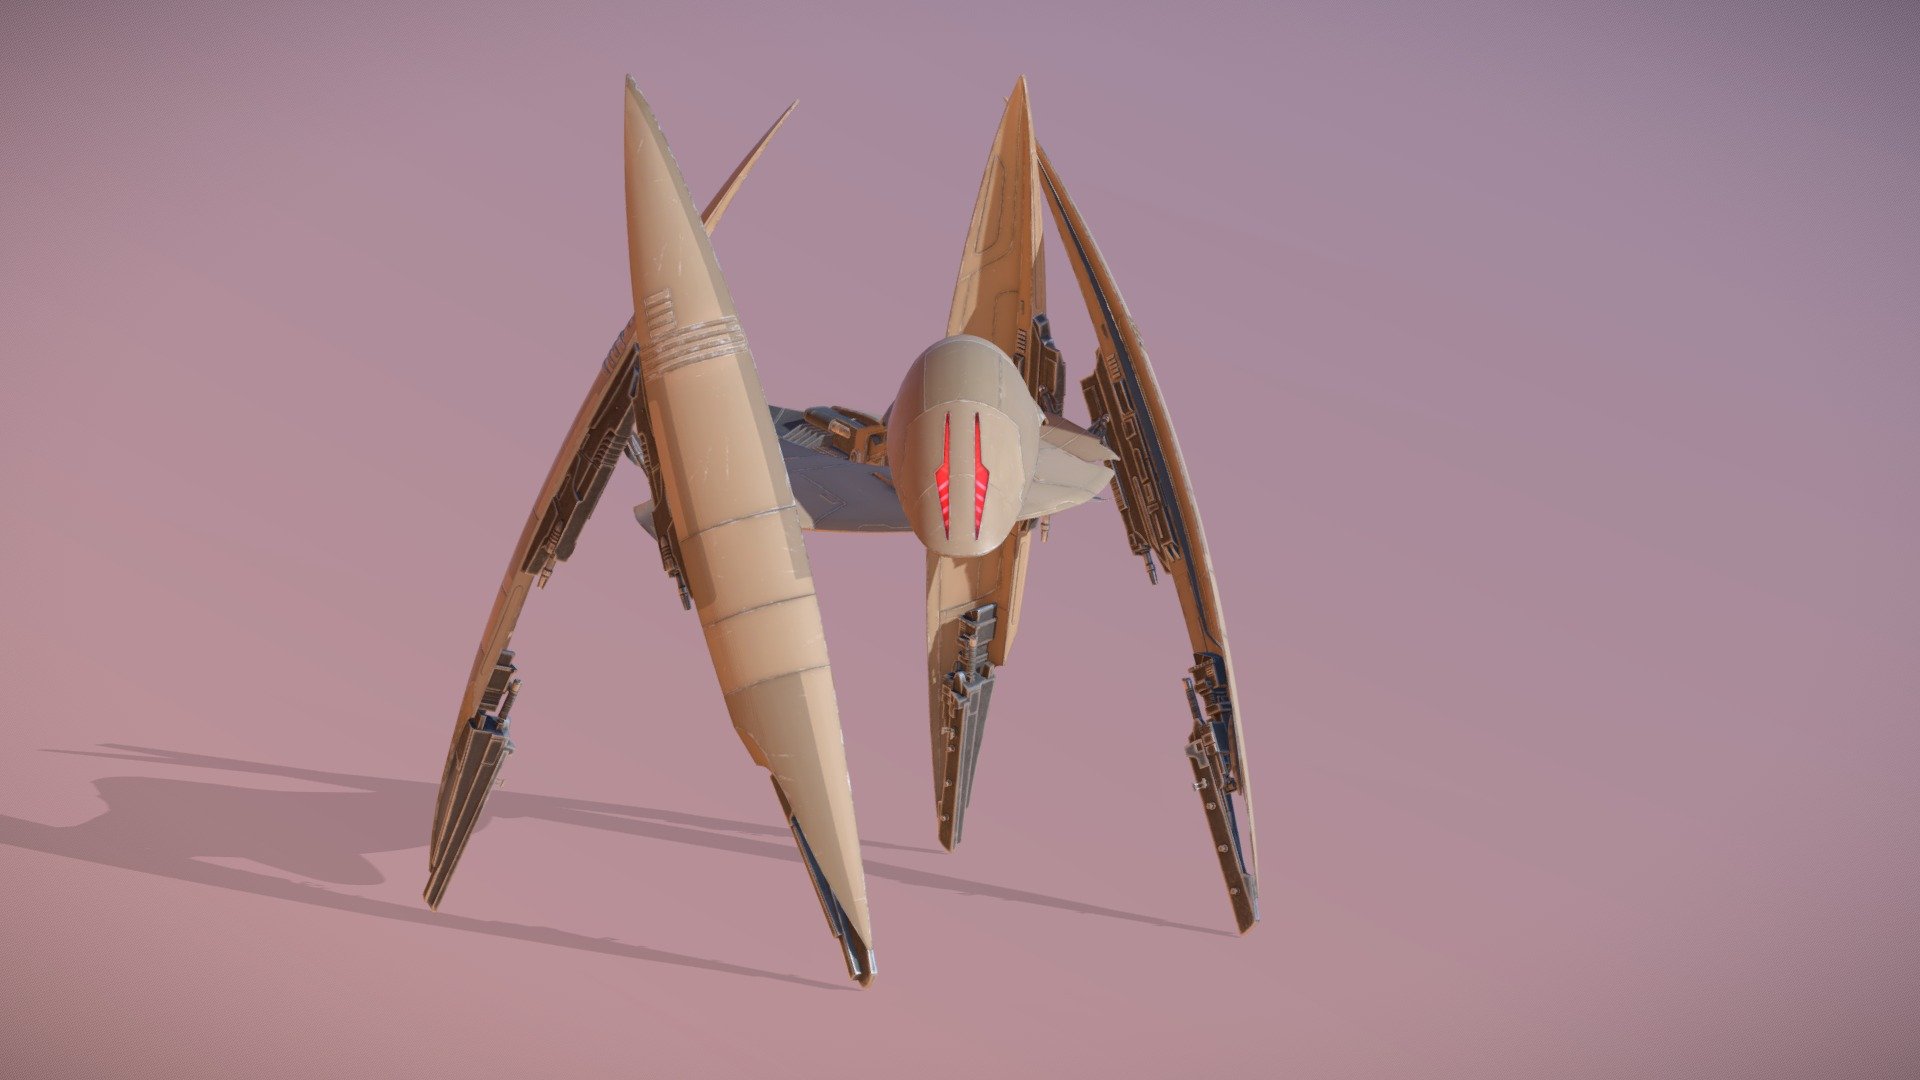 Vulture droid with the design from The Phantom Menace but with some details from Revenge of the Sith.

Modelled in Blender 3.4.1
PBR Textures made in Substance Painter 8.3.0

Horrifying topology as usual, but in my defense Sketchfab messed up with importing the FBX file and I'm too lazy to fix it lol

It is rigged here, but I have genuinely have no clue how to correctly put it into sketchfab, I tried to figure it out, but I gave up after I noticed my brain leaking out of my eyes… I did post an animation on my Artstation account if you want to see it 3d model